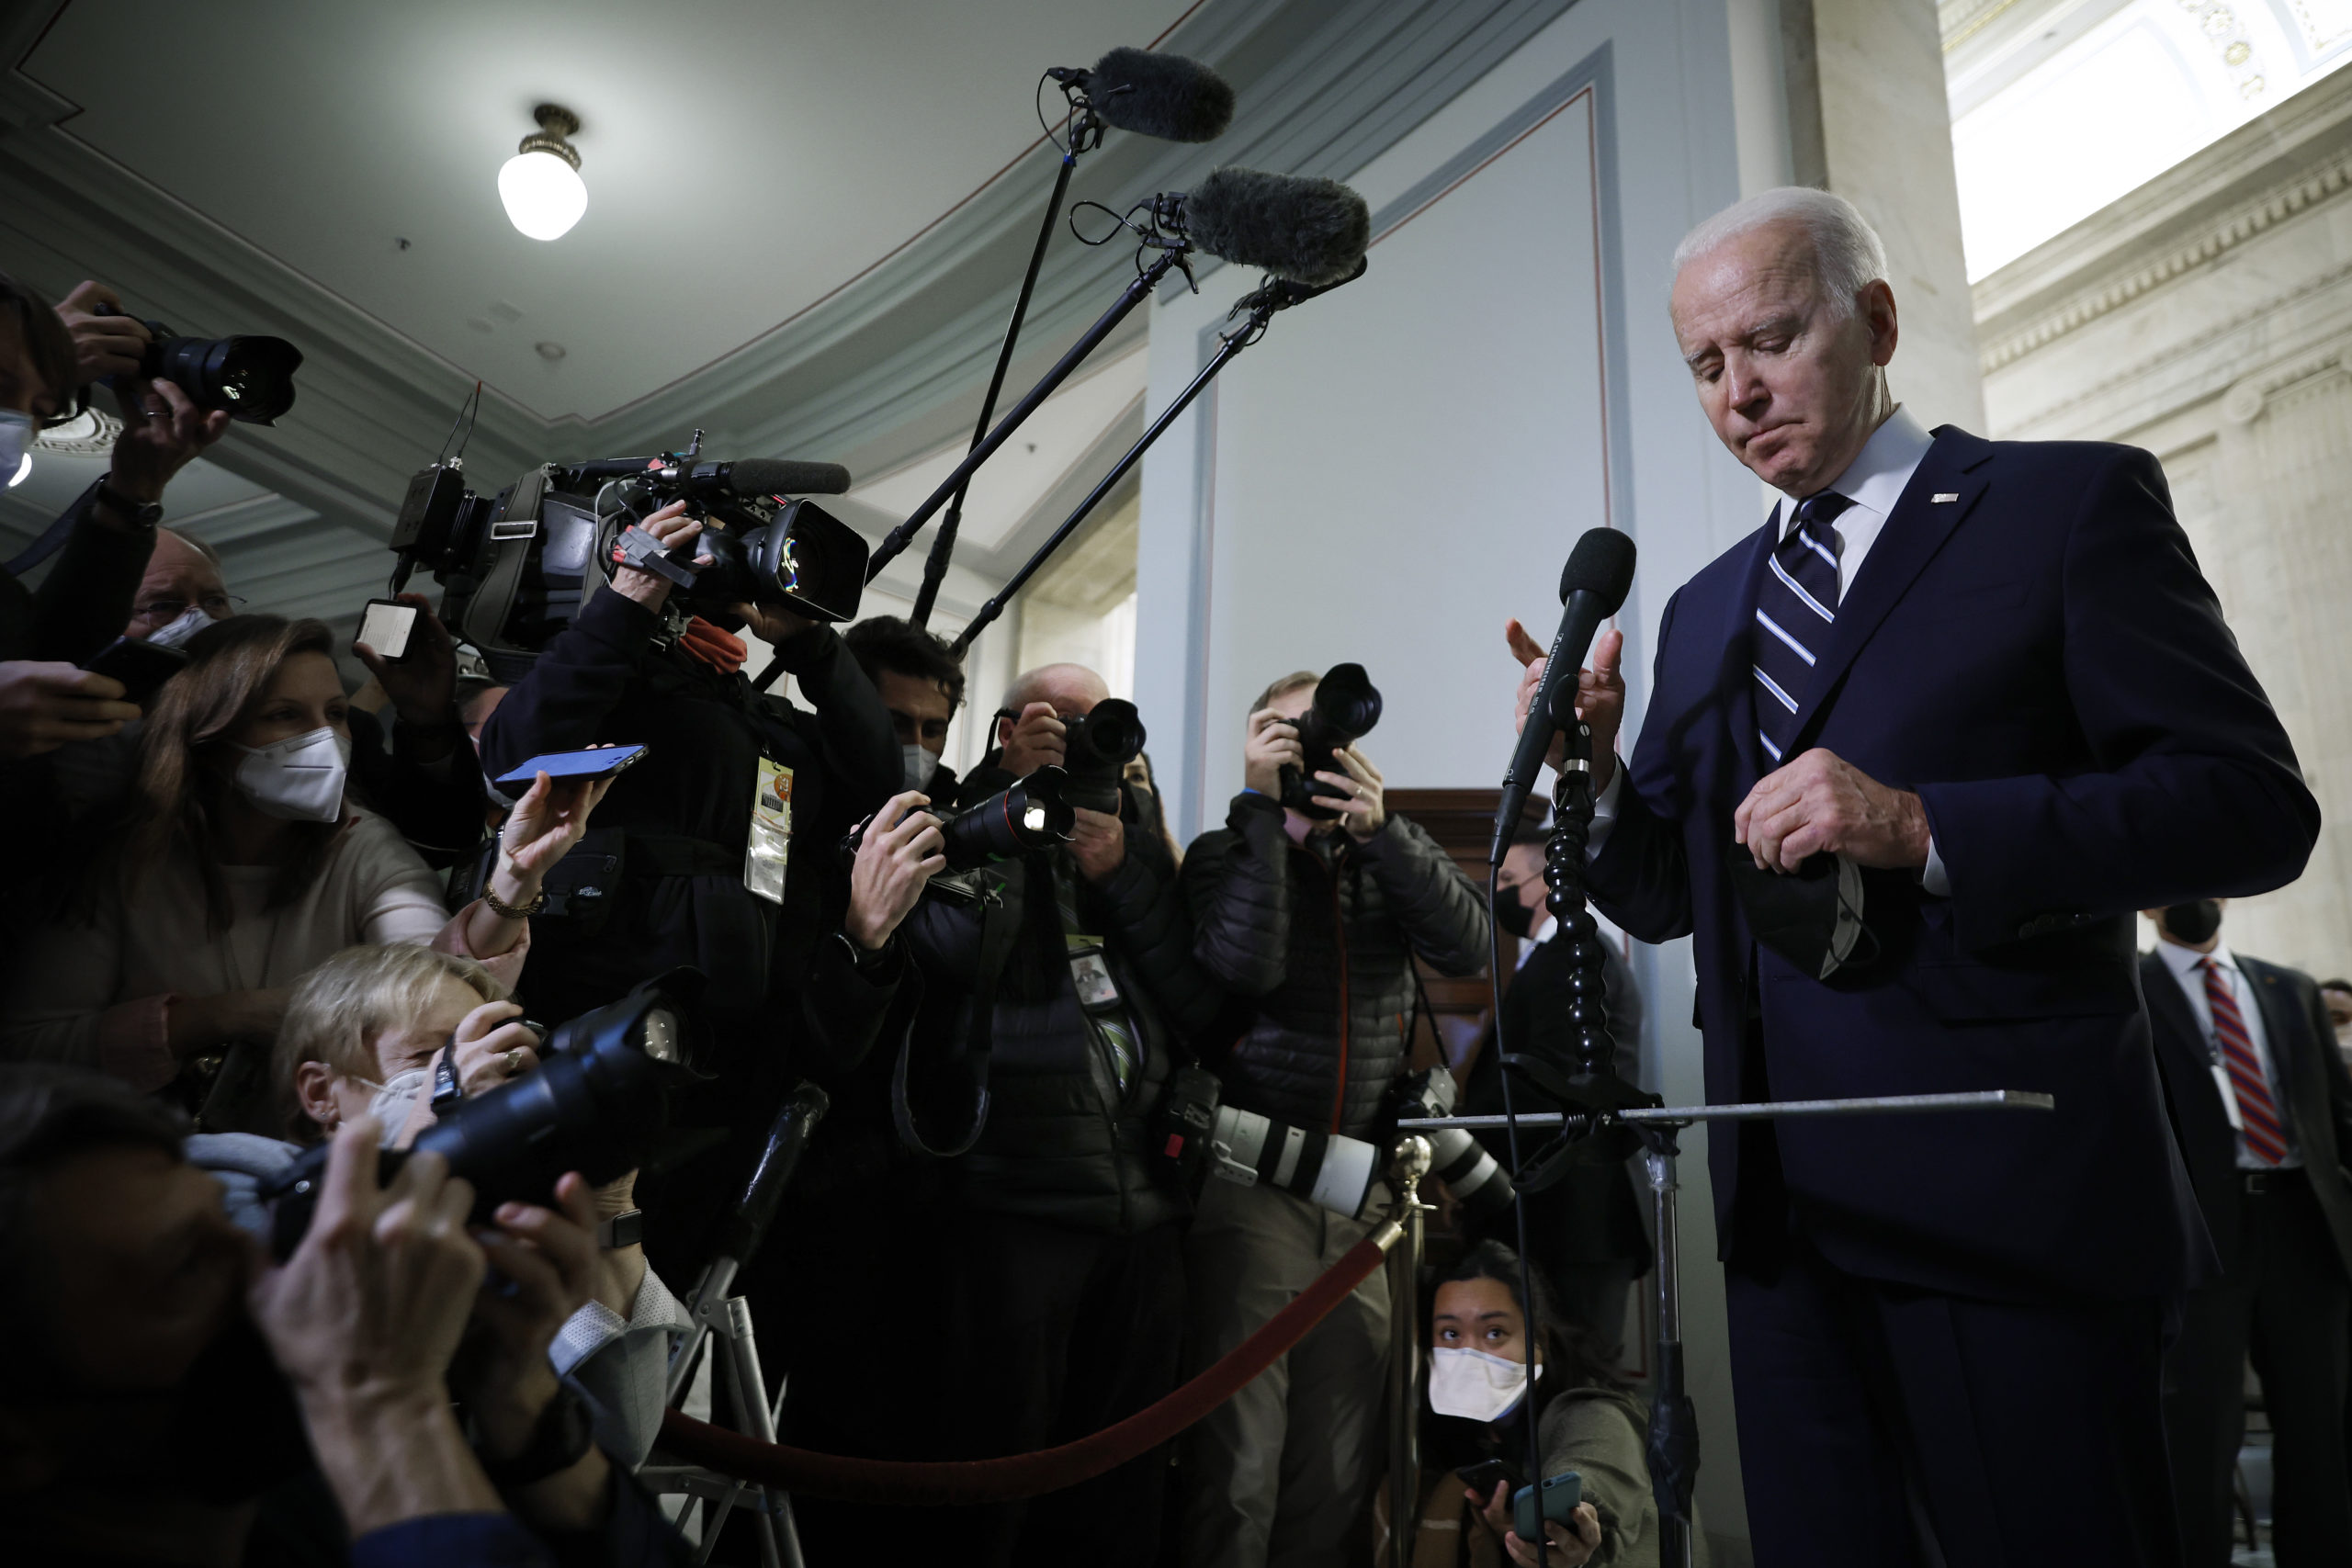 U.S. President Joe Biden talks to reporters after meeting with Senate Democrats in the Russell Senate Office Building on Capitol Hill on January 13, 2022 in Washington, DC. Biden has called on his fellow Democrats to go around Republican opposition, do away with the 60-vote threshold for advancing legislation in the Senate and pass the John Lewis Voting Rights Advancement Act and the Freedom To Vote Act. The strategy is in doubt because Sen. Joe Manchin (D-WV) and Sen. Kyrsten Sinema (D-AZ) oppose doing away with the filibuster. (Photo by Chip Somodevilla/Getty Images)